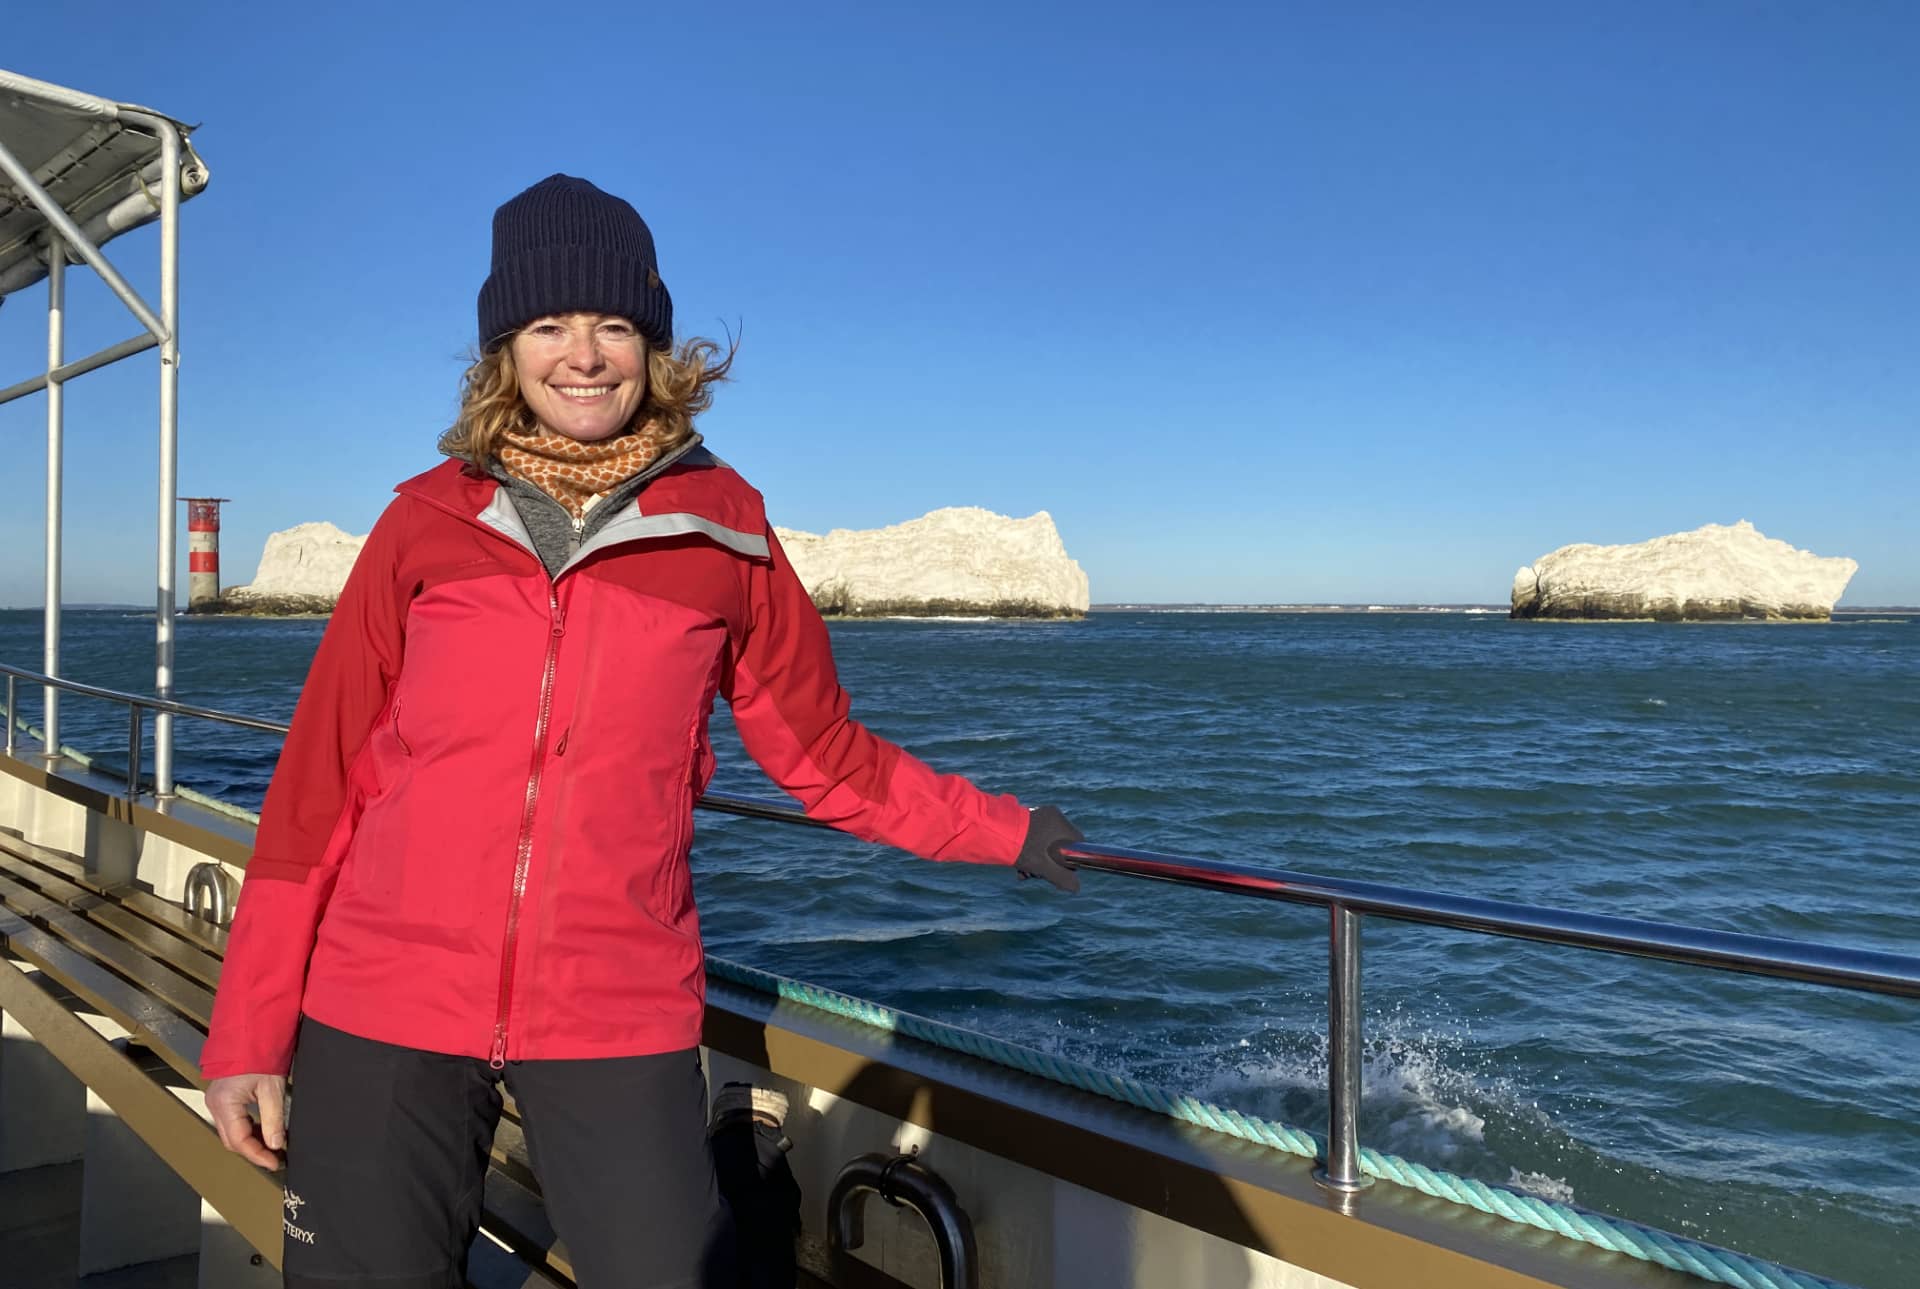 Kate Humble on a boat by The Needles Isle of Wight